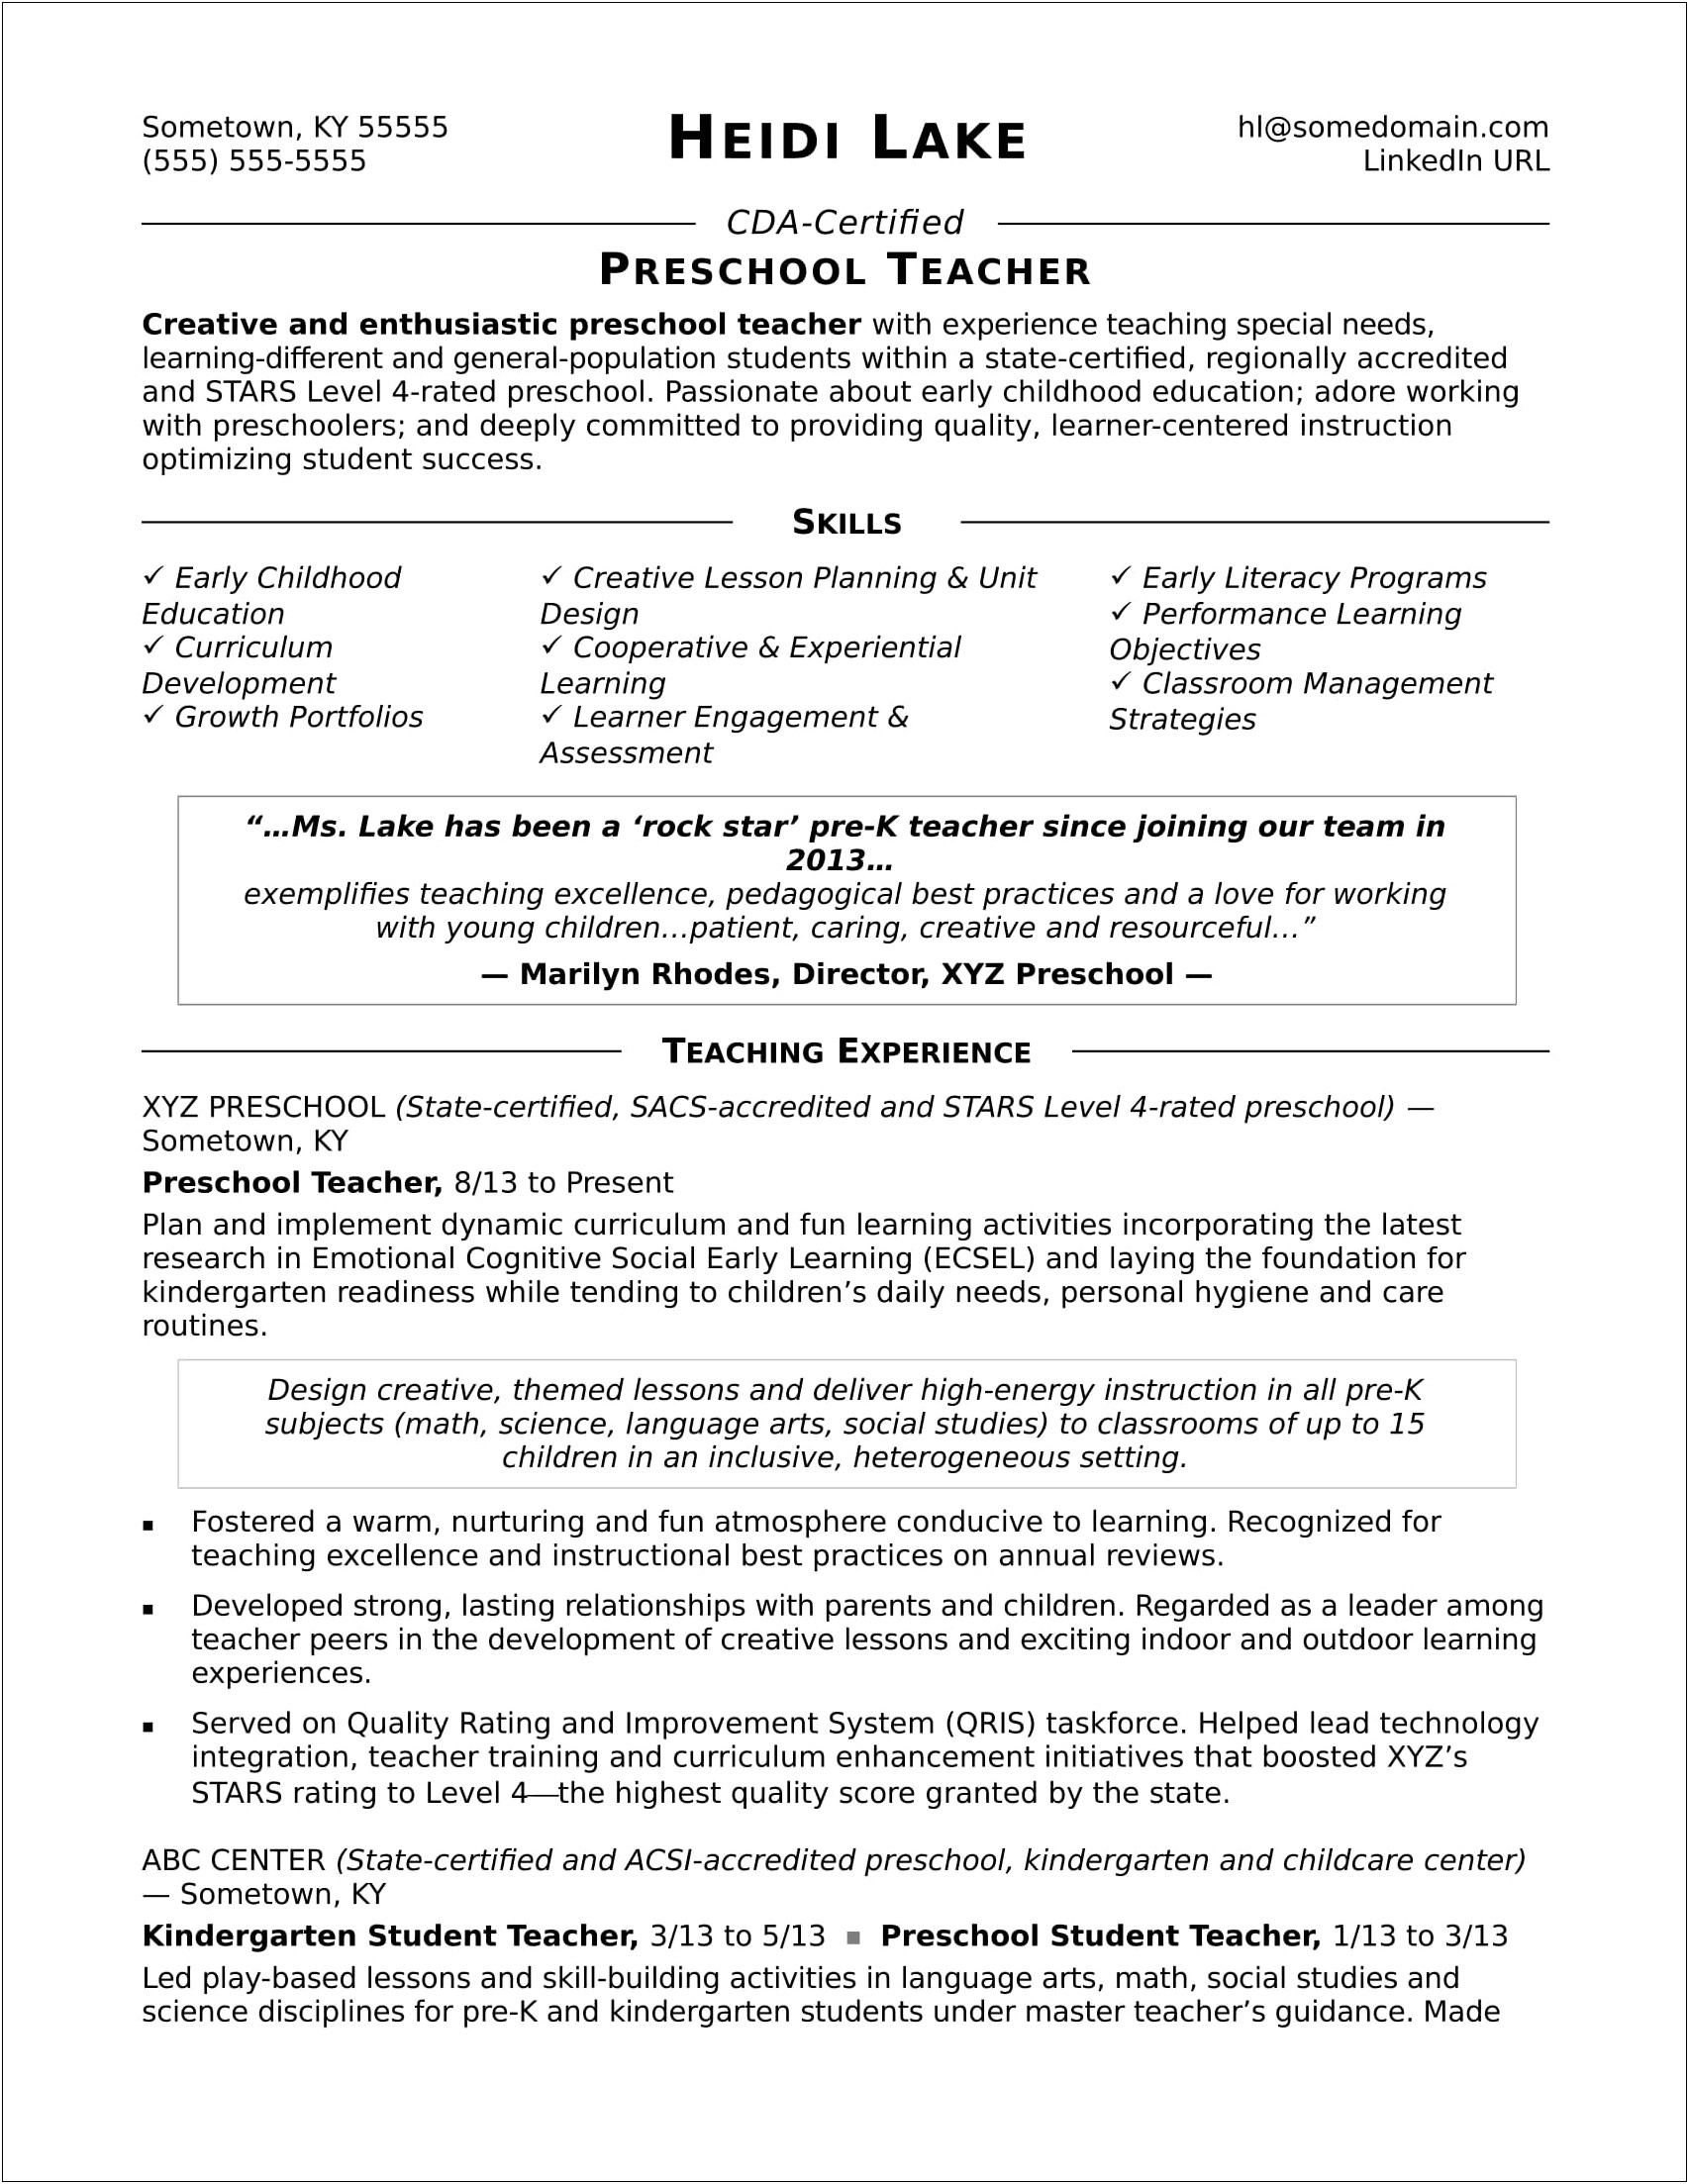 Resume Sample For Early Childhood Assistant Teachers